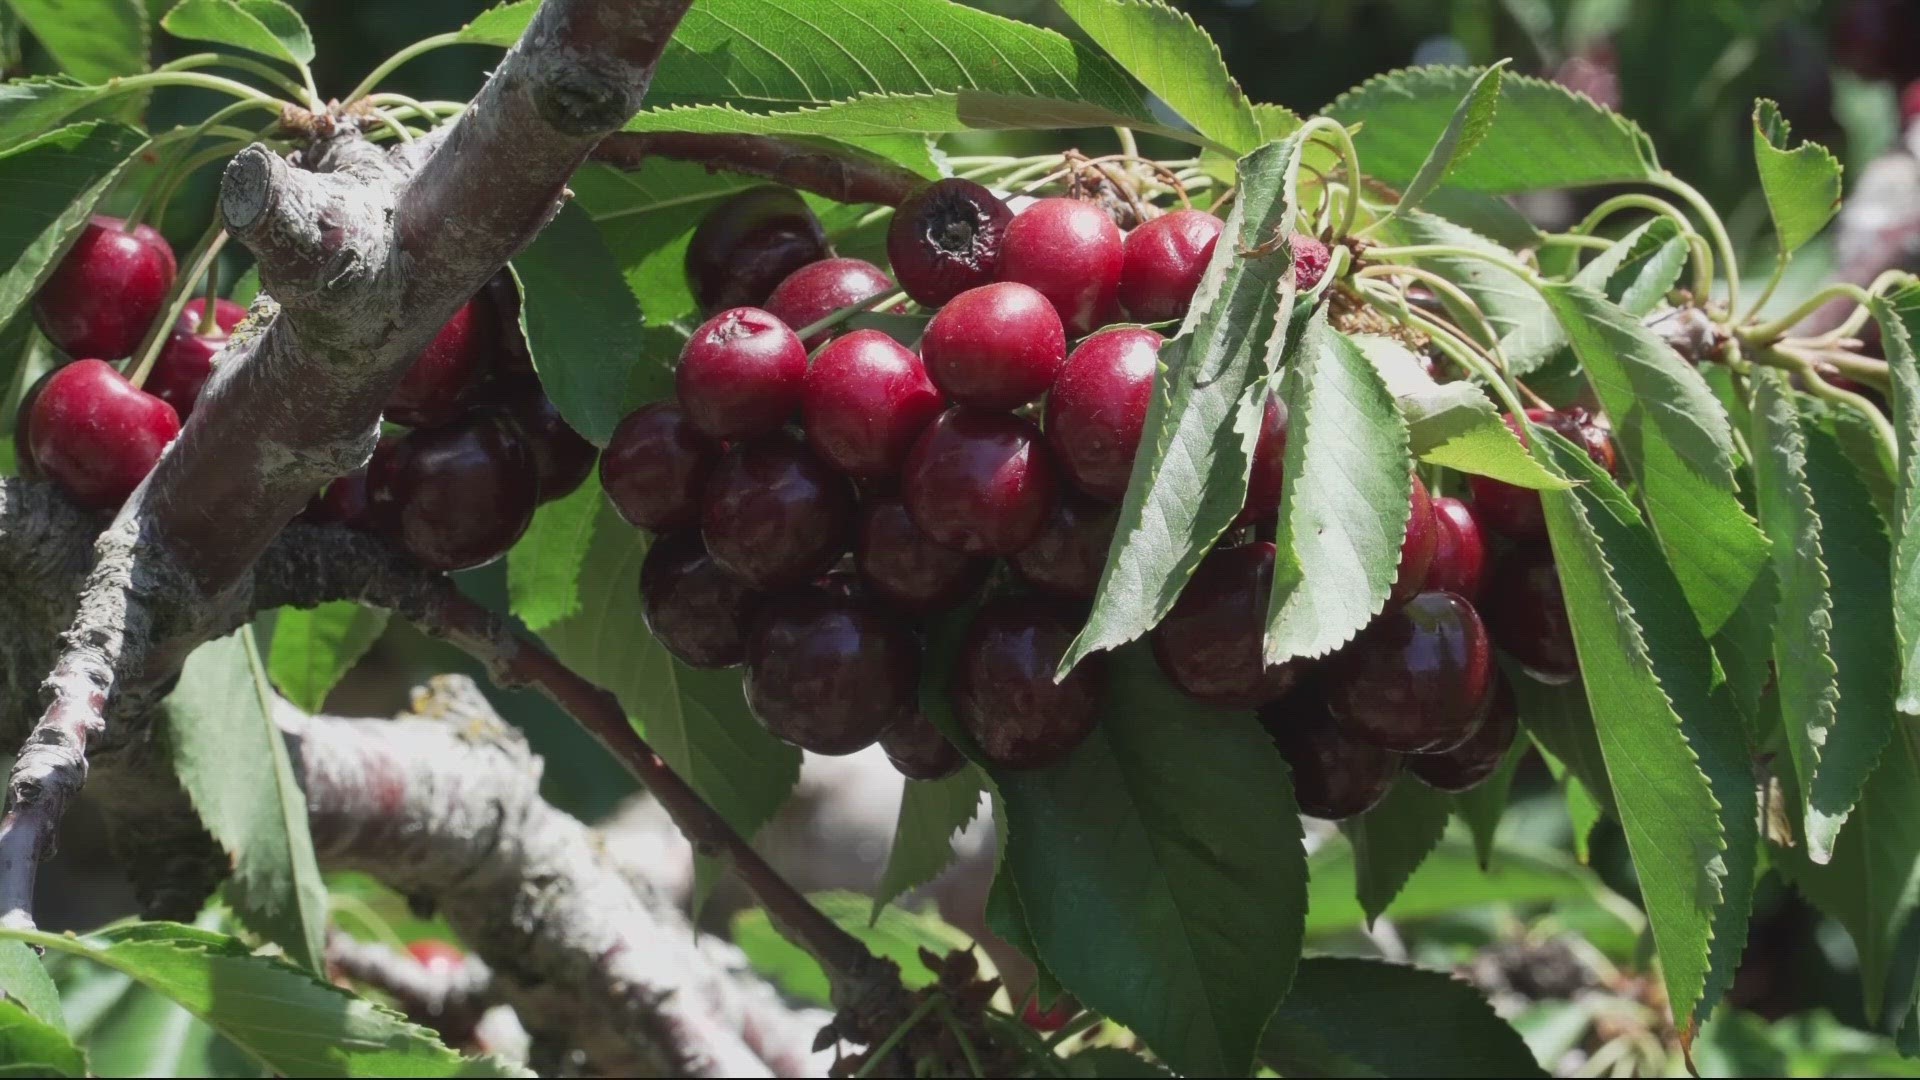 This year marks the third bad crop season in a row for Oregon cherry farmers, state leaders are looking into funding.